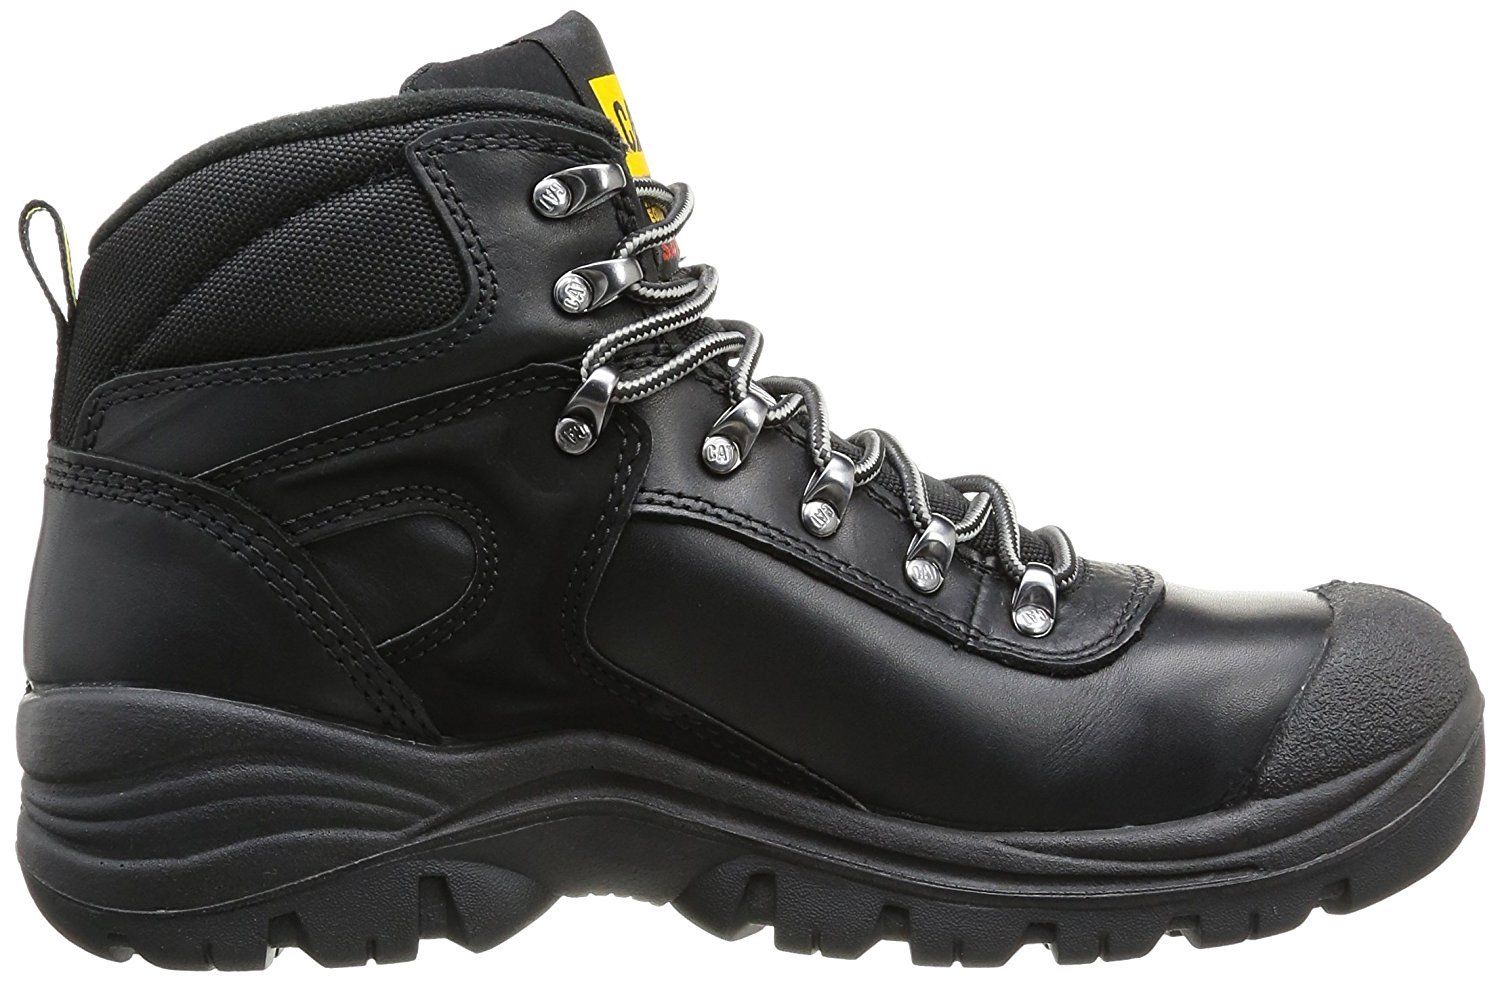 Mens Caterpillar Pneumatic S3 Safety Work Steel Toe Boots Sizes 6 to 12 ...